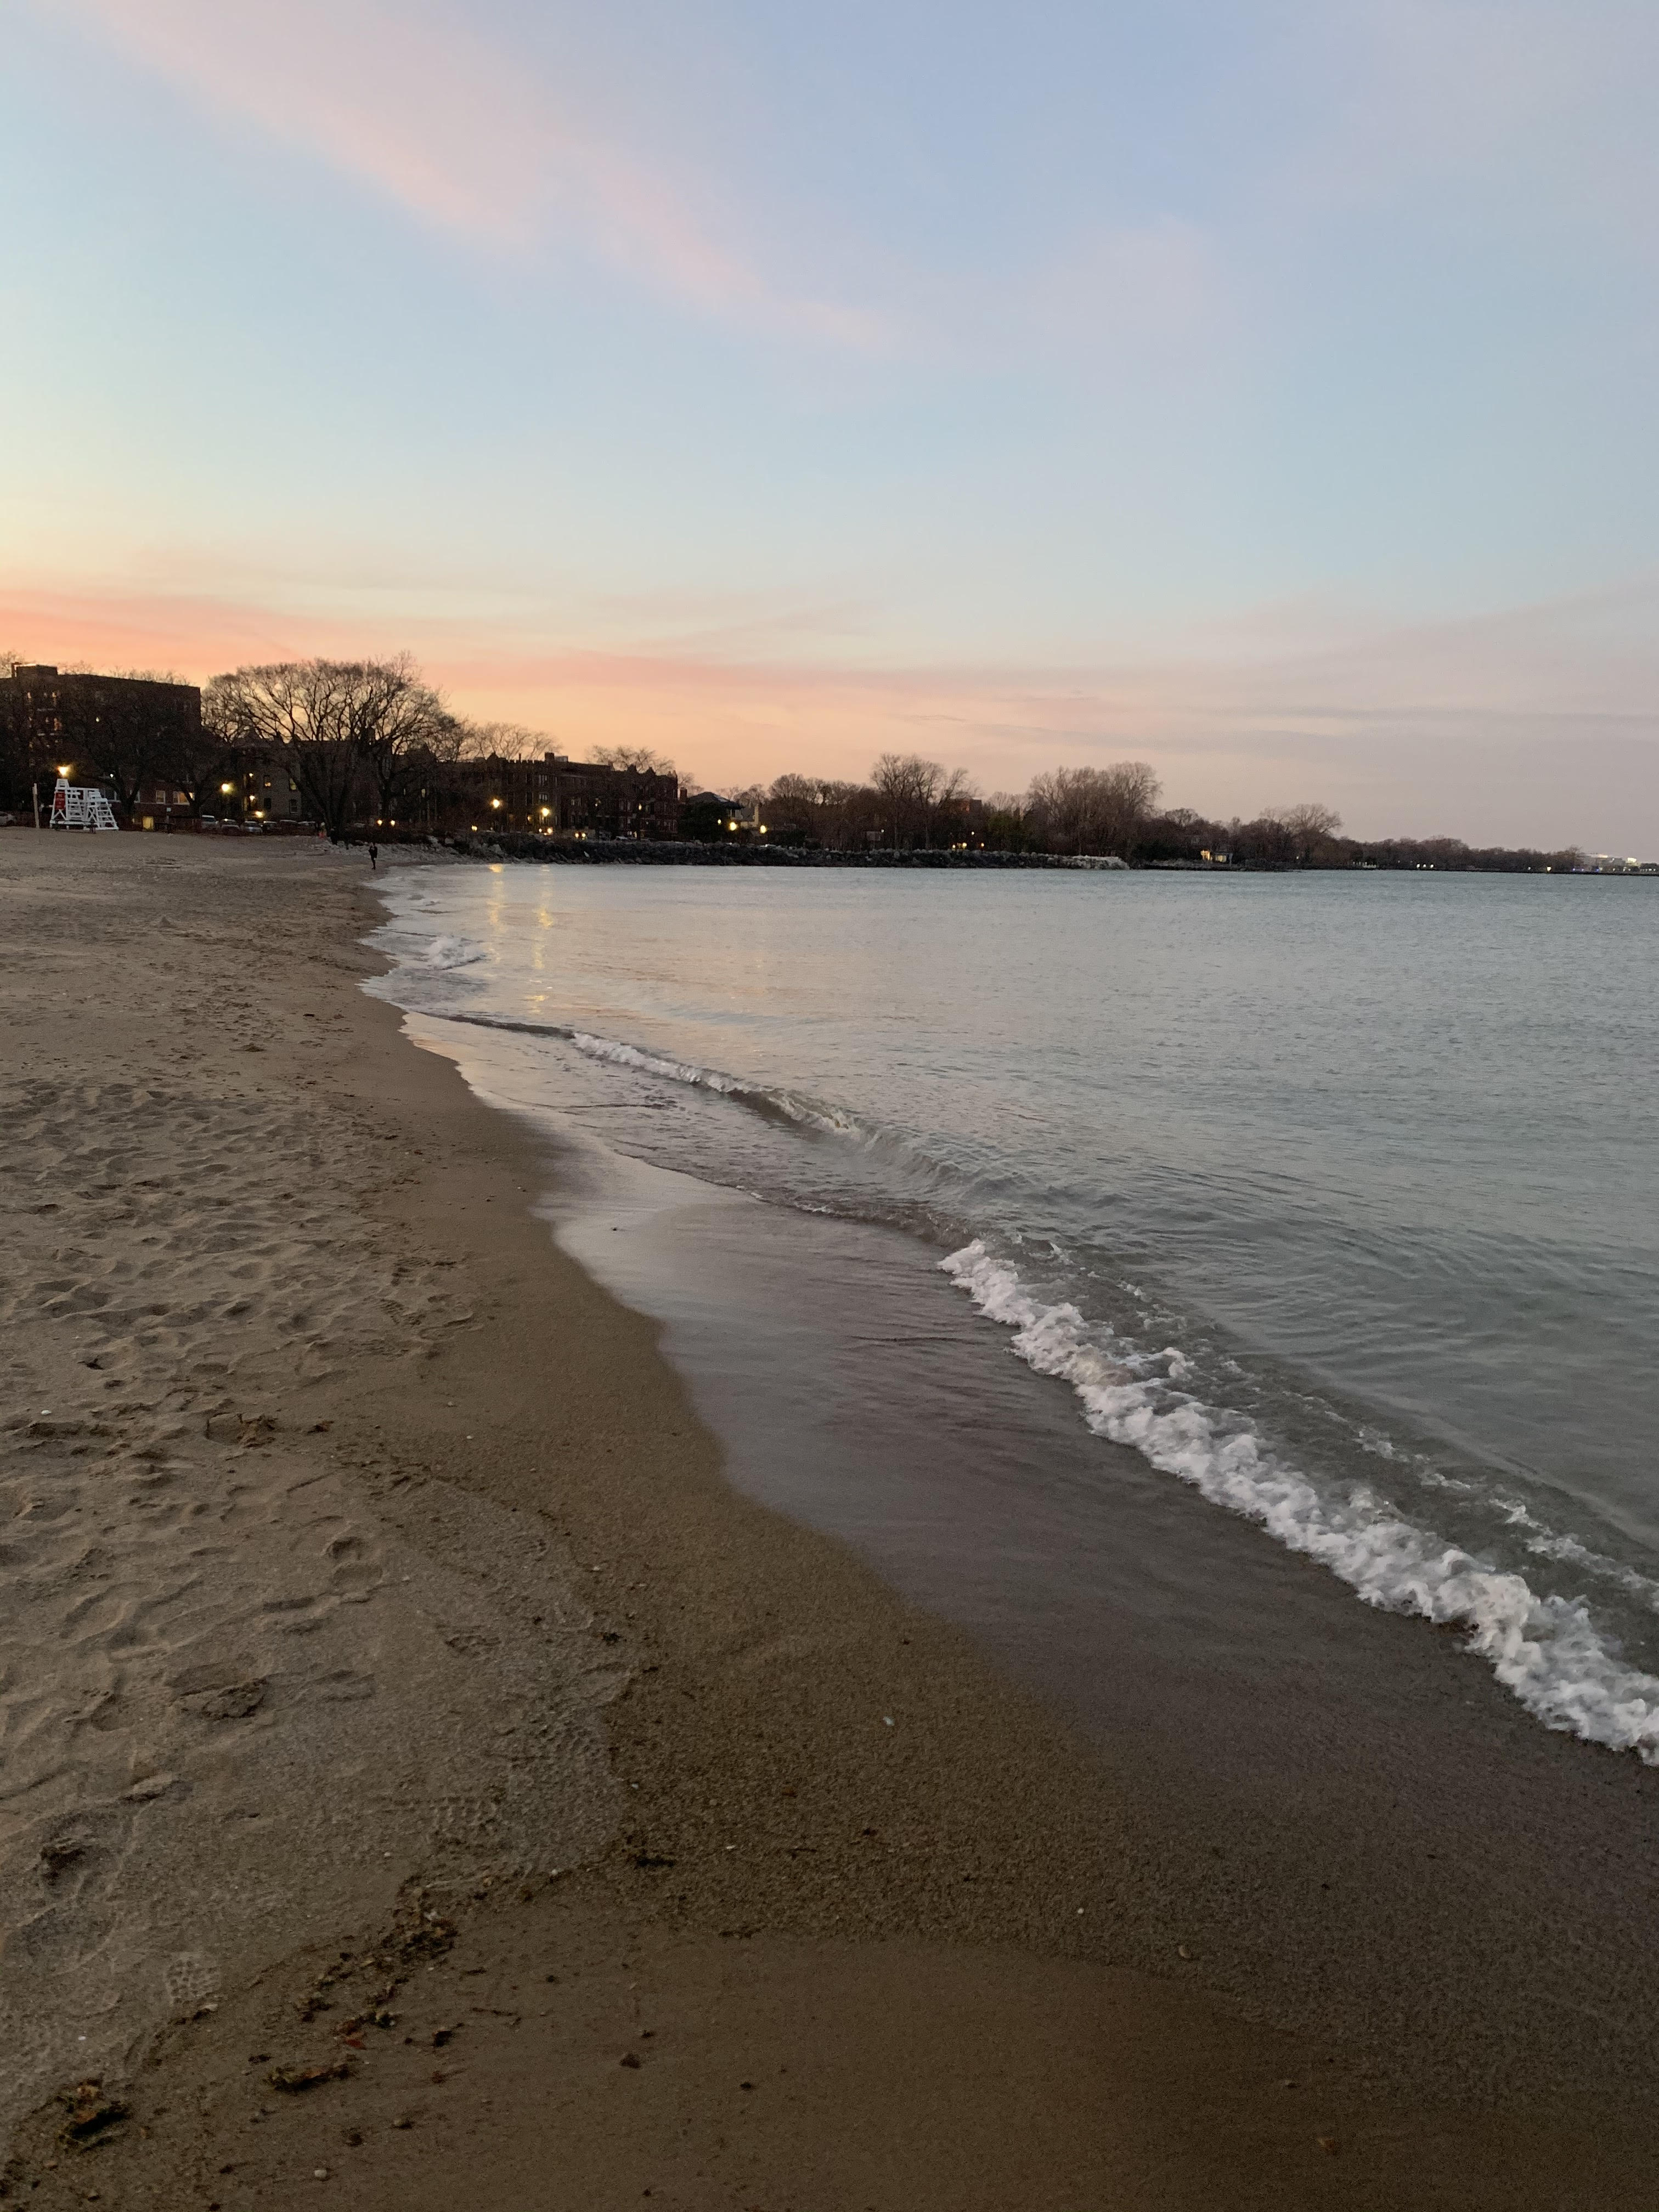 Why I moved to Evanston